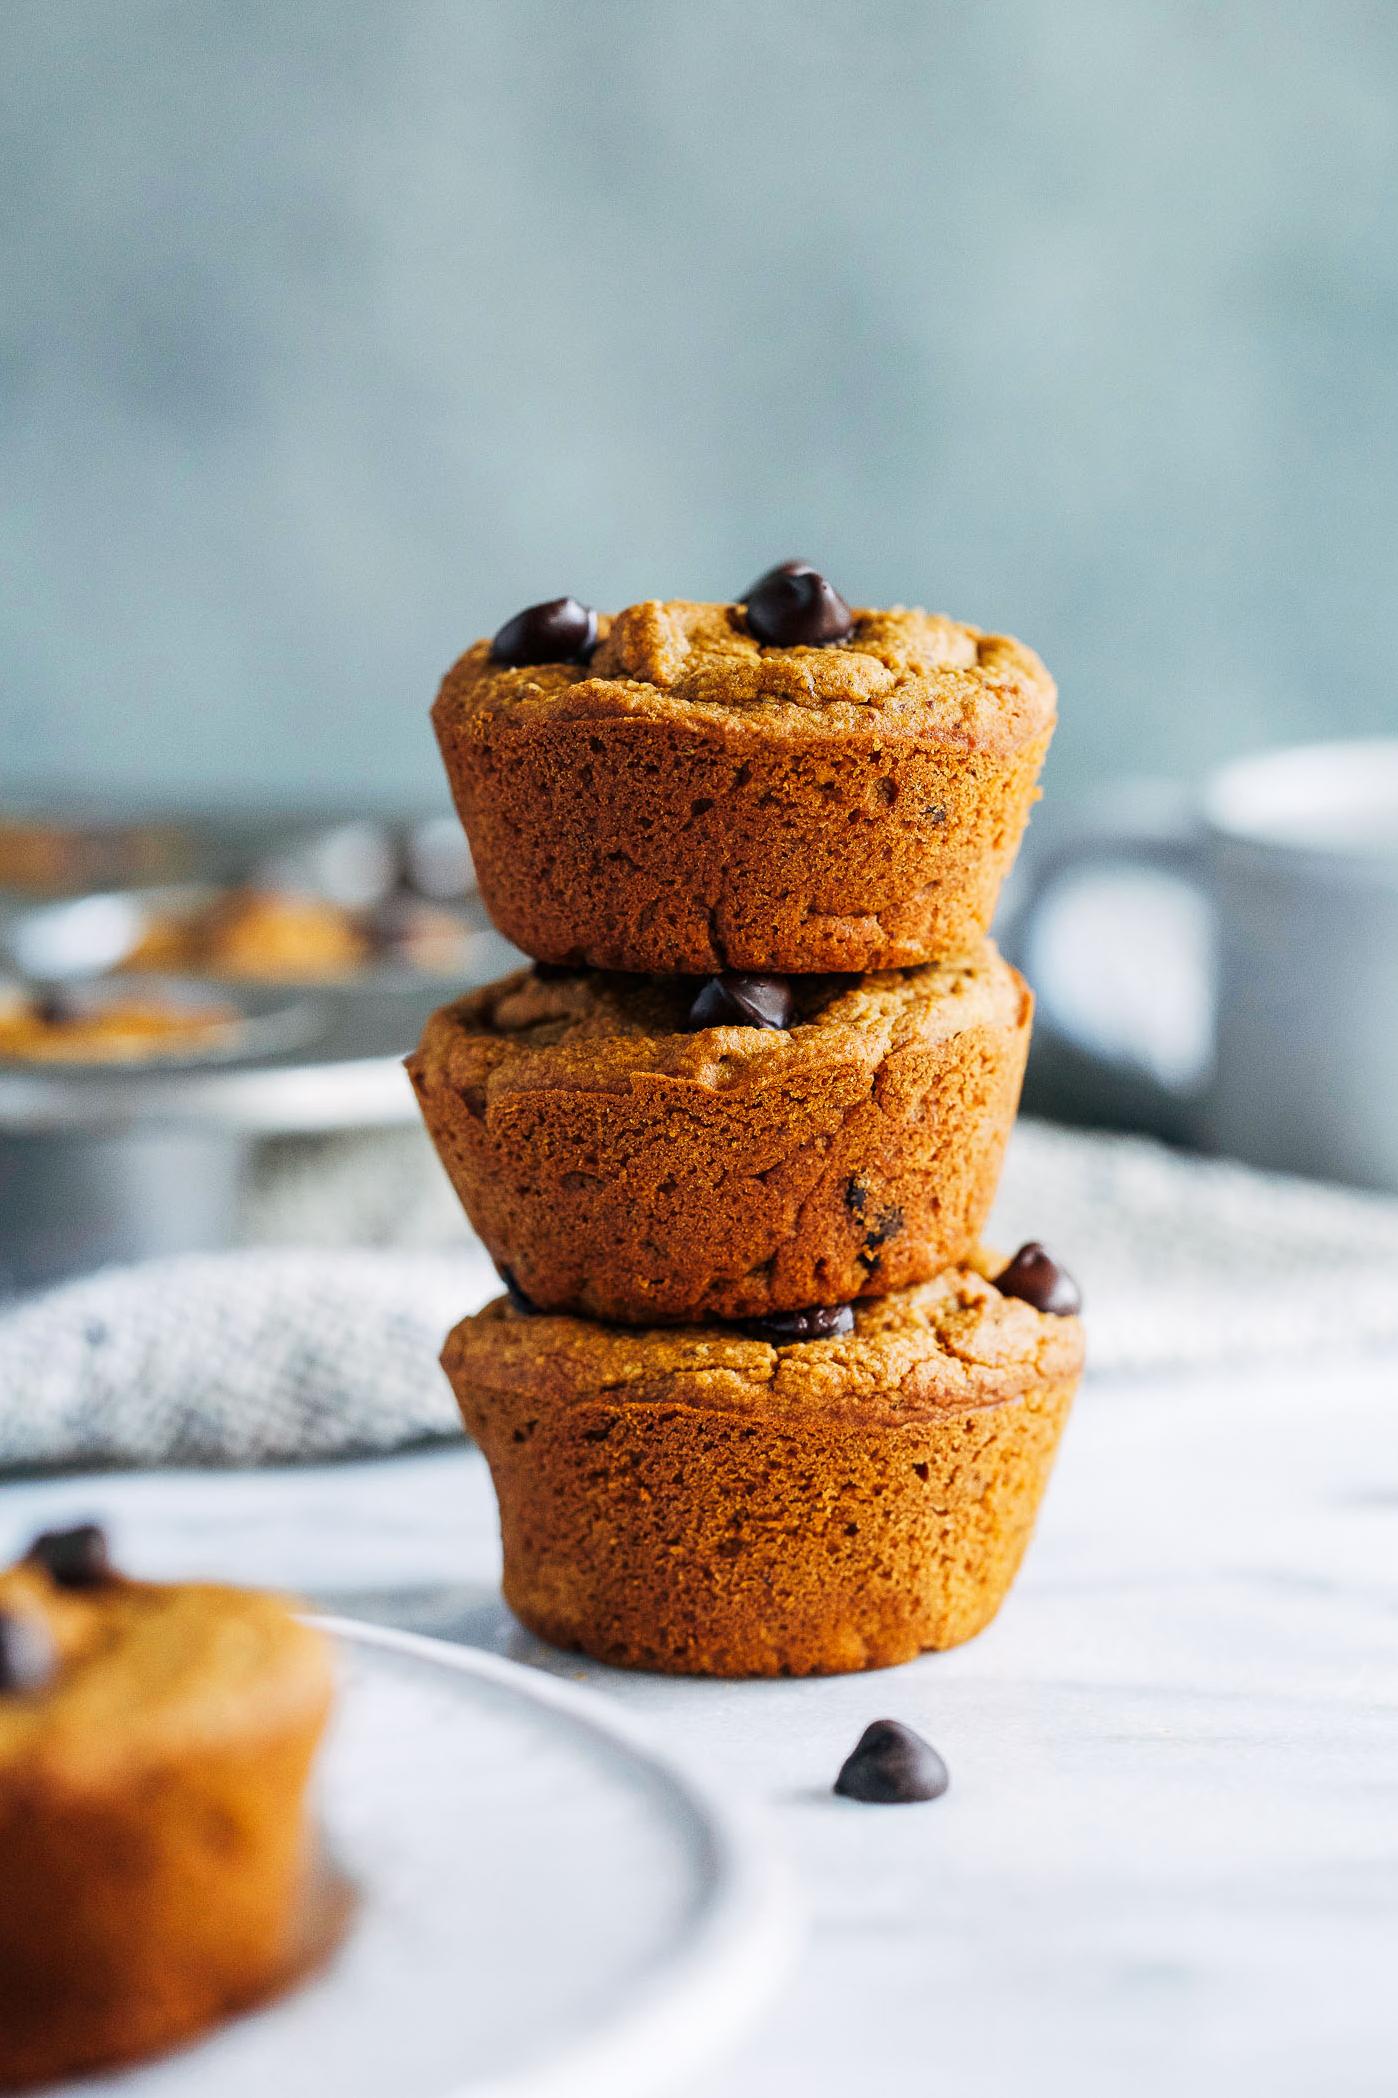  These muffins are screaming for a hot cup of coffee or tea.